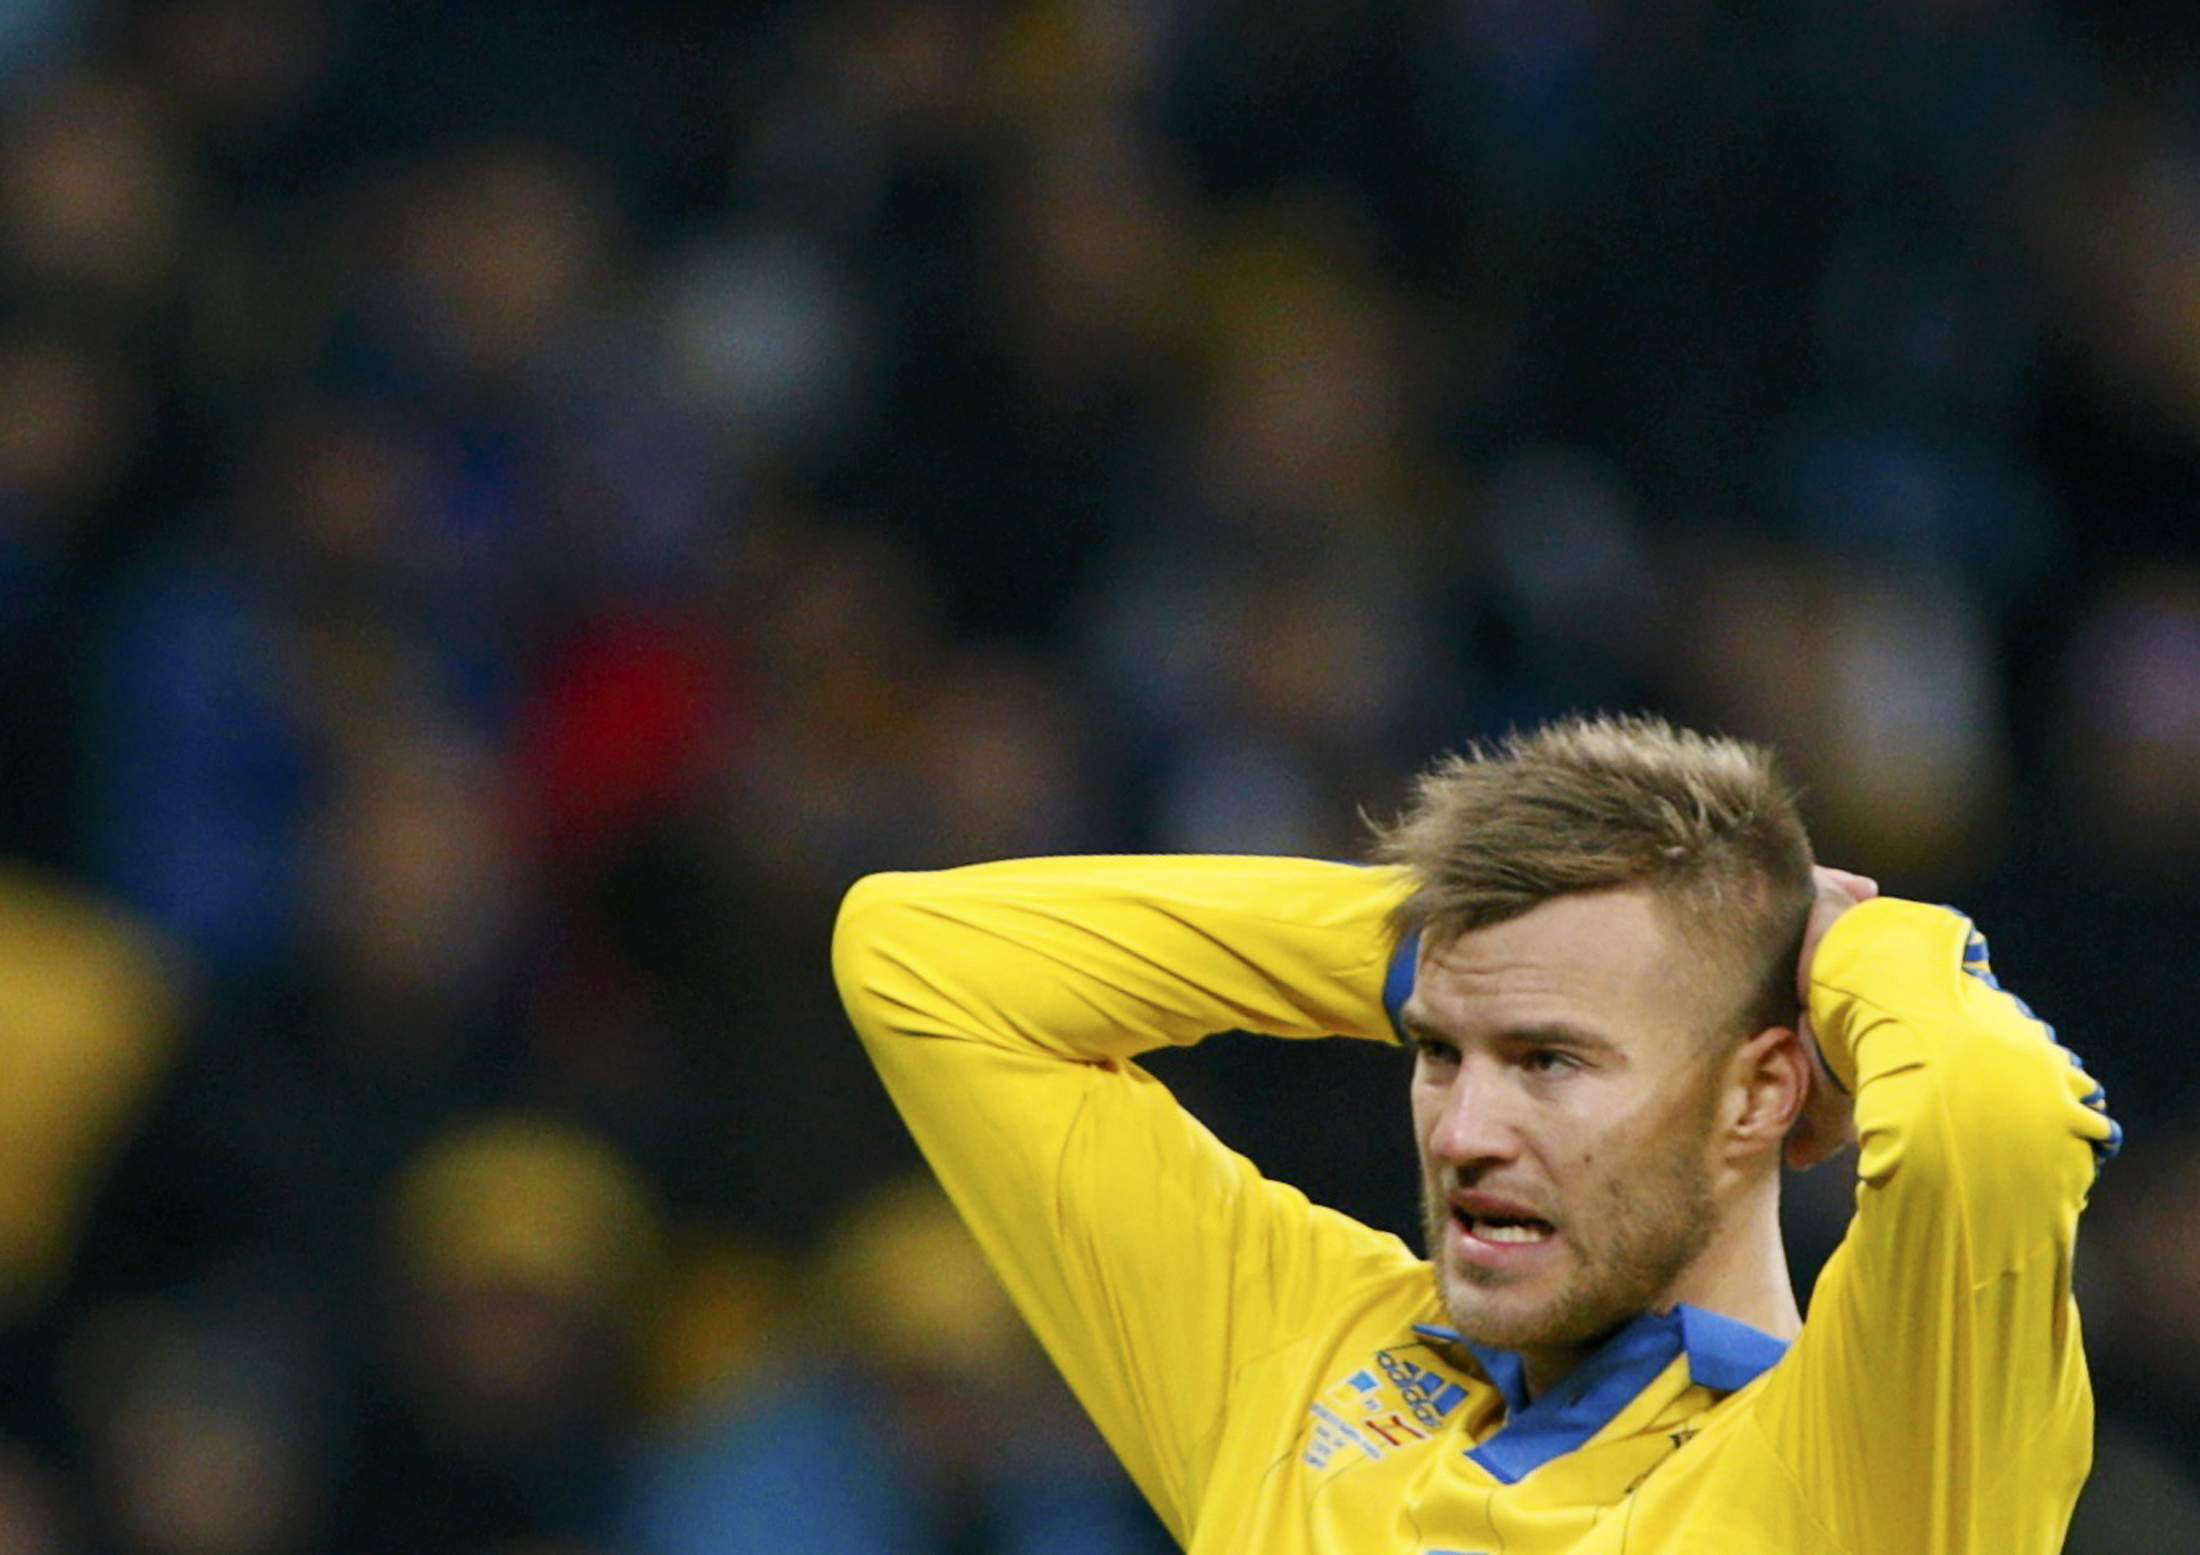 Ukraine's Andriy Yarmolenko reacts after a missed chance during the Euro 2016 group C qualifying soccer match against Spain at the Olympic stadium in Kiev, Ukraine, October 12, 2015. REUTERS/Valentyn Ogirenko